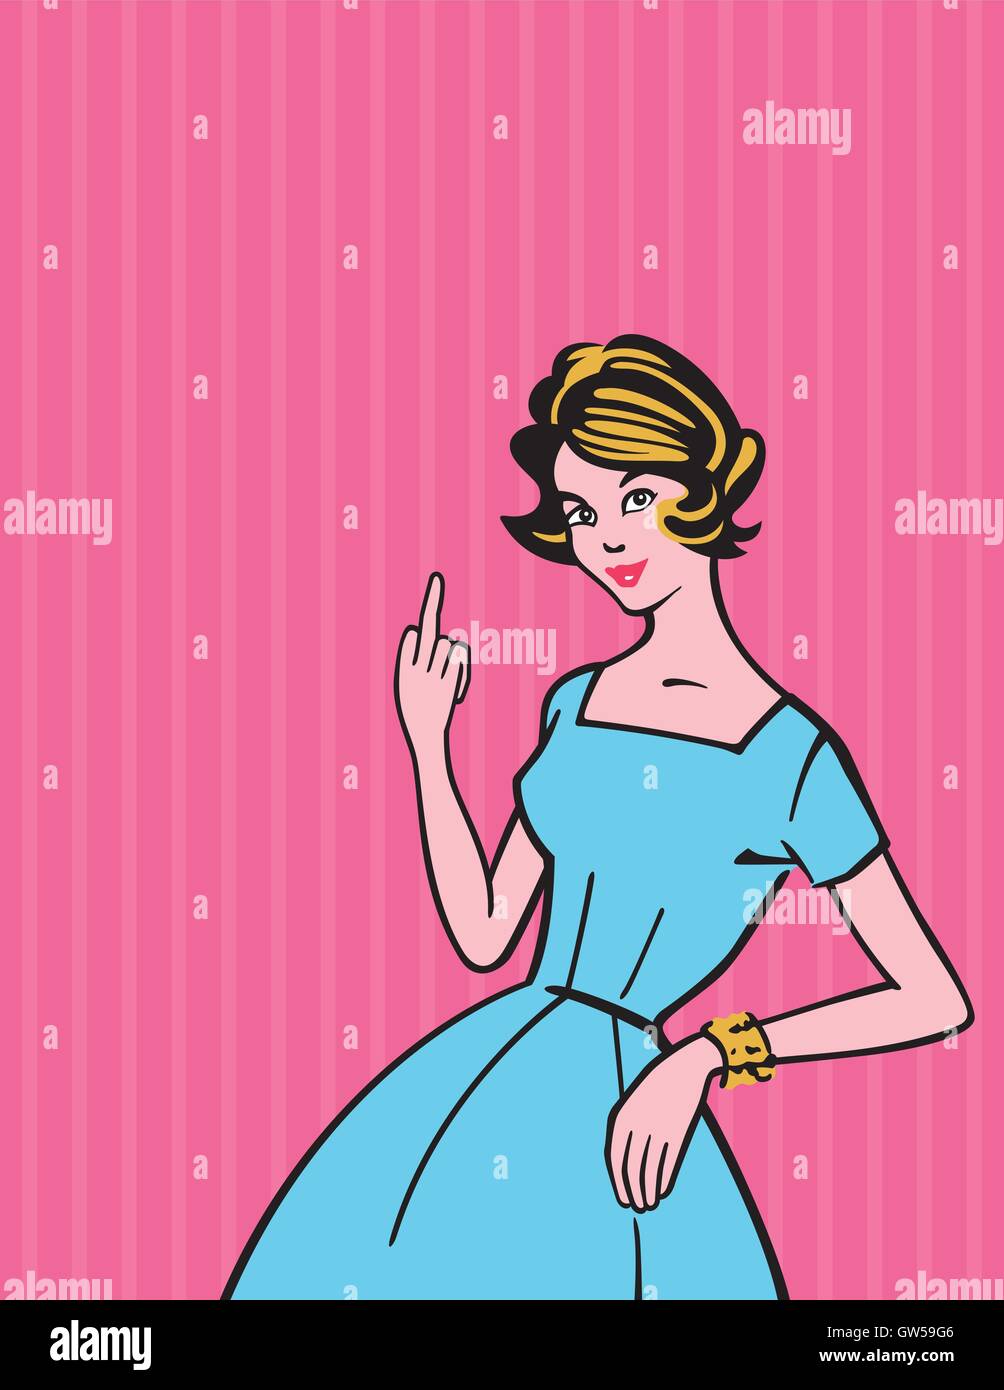 Rude Housewife retro vector illustration. Classic housewife illustration with a twist - she is giving the finger or the bird. Vintage style graphics Stock Vector